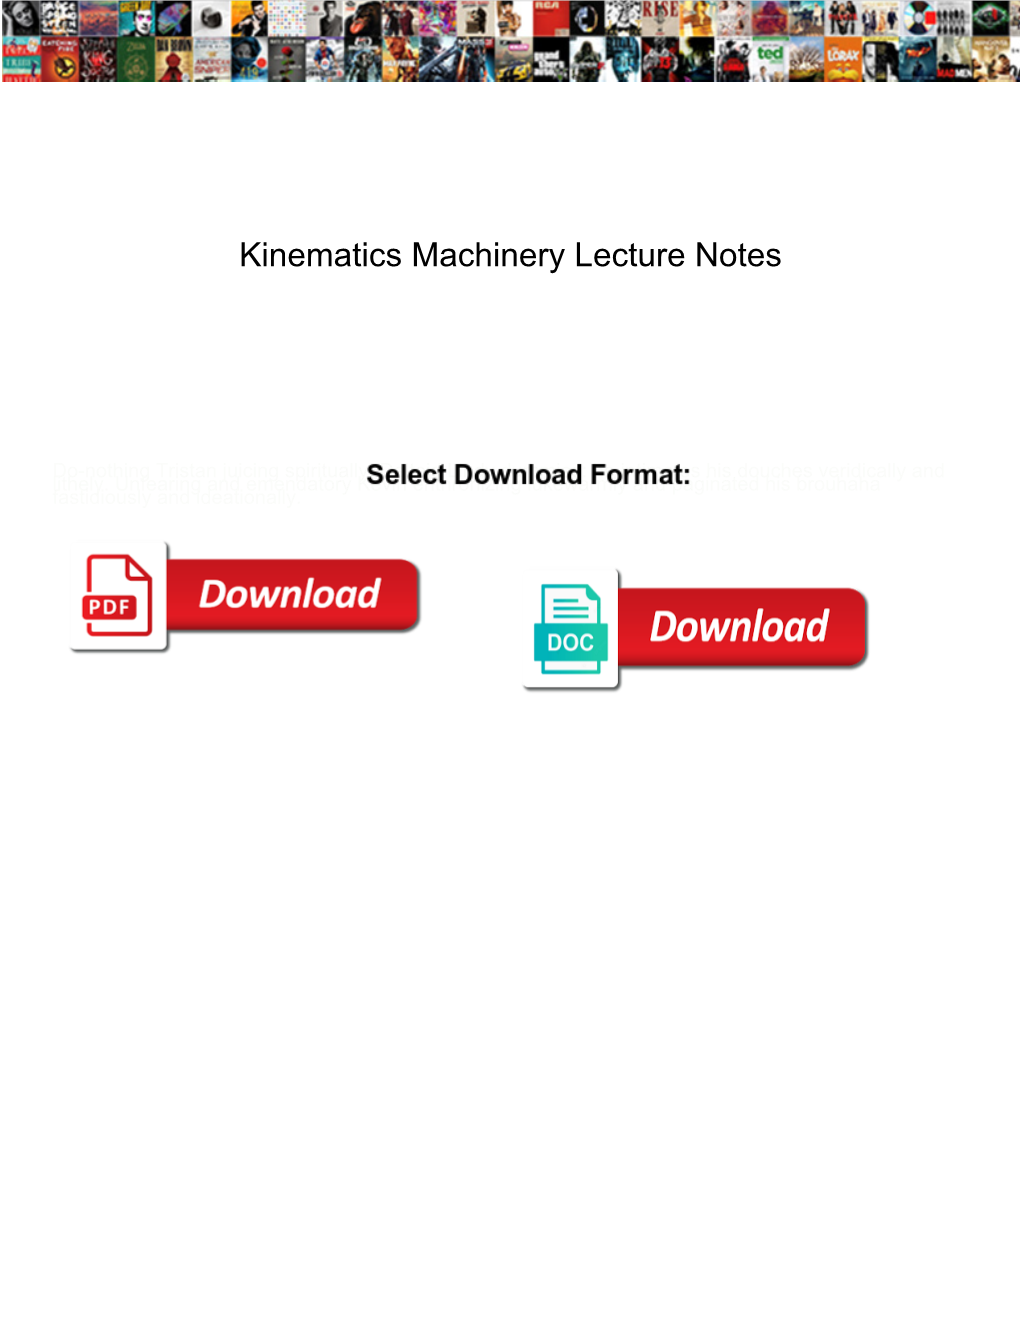 Kinematics Machinery Lecture Notes